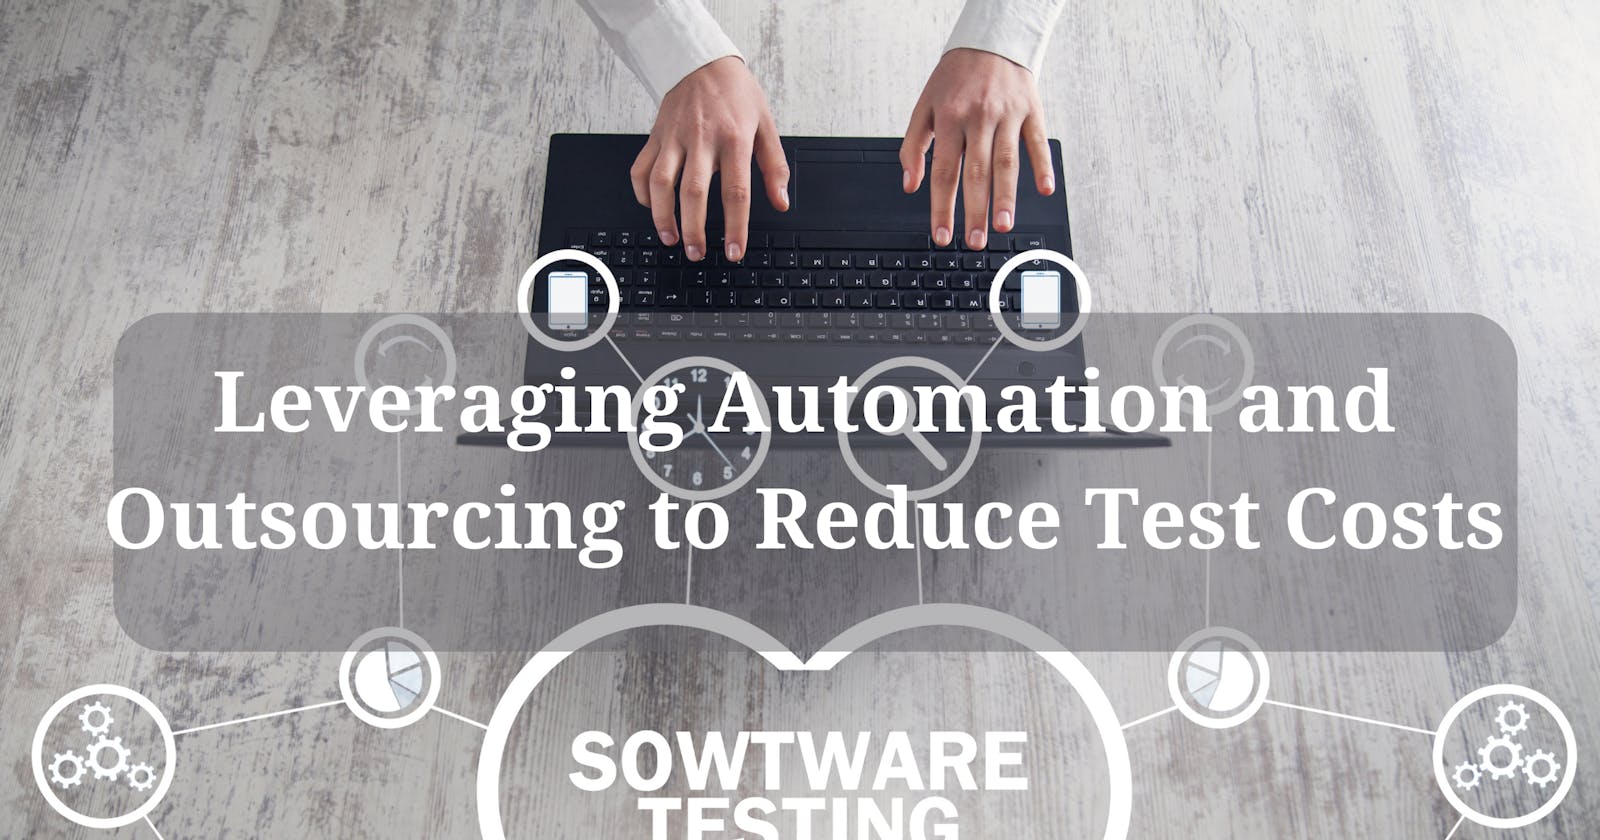 Leveraging Automation and Outsourcing to Reduce Test Costs